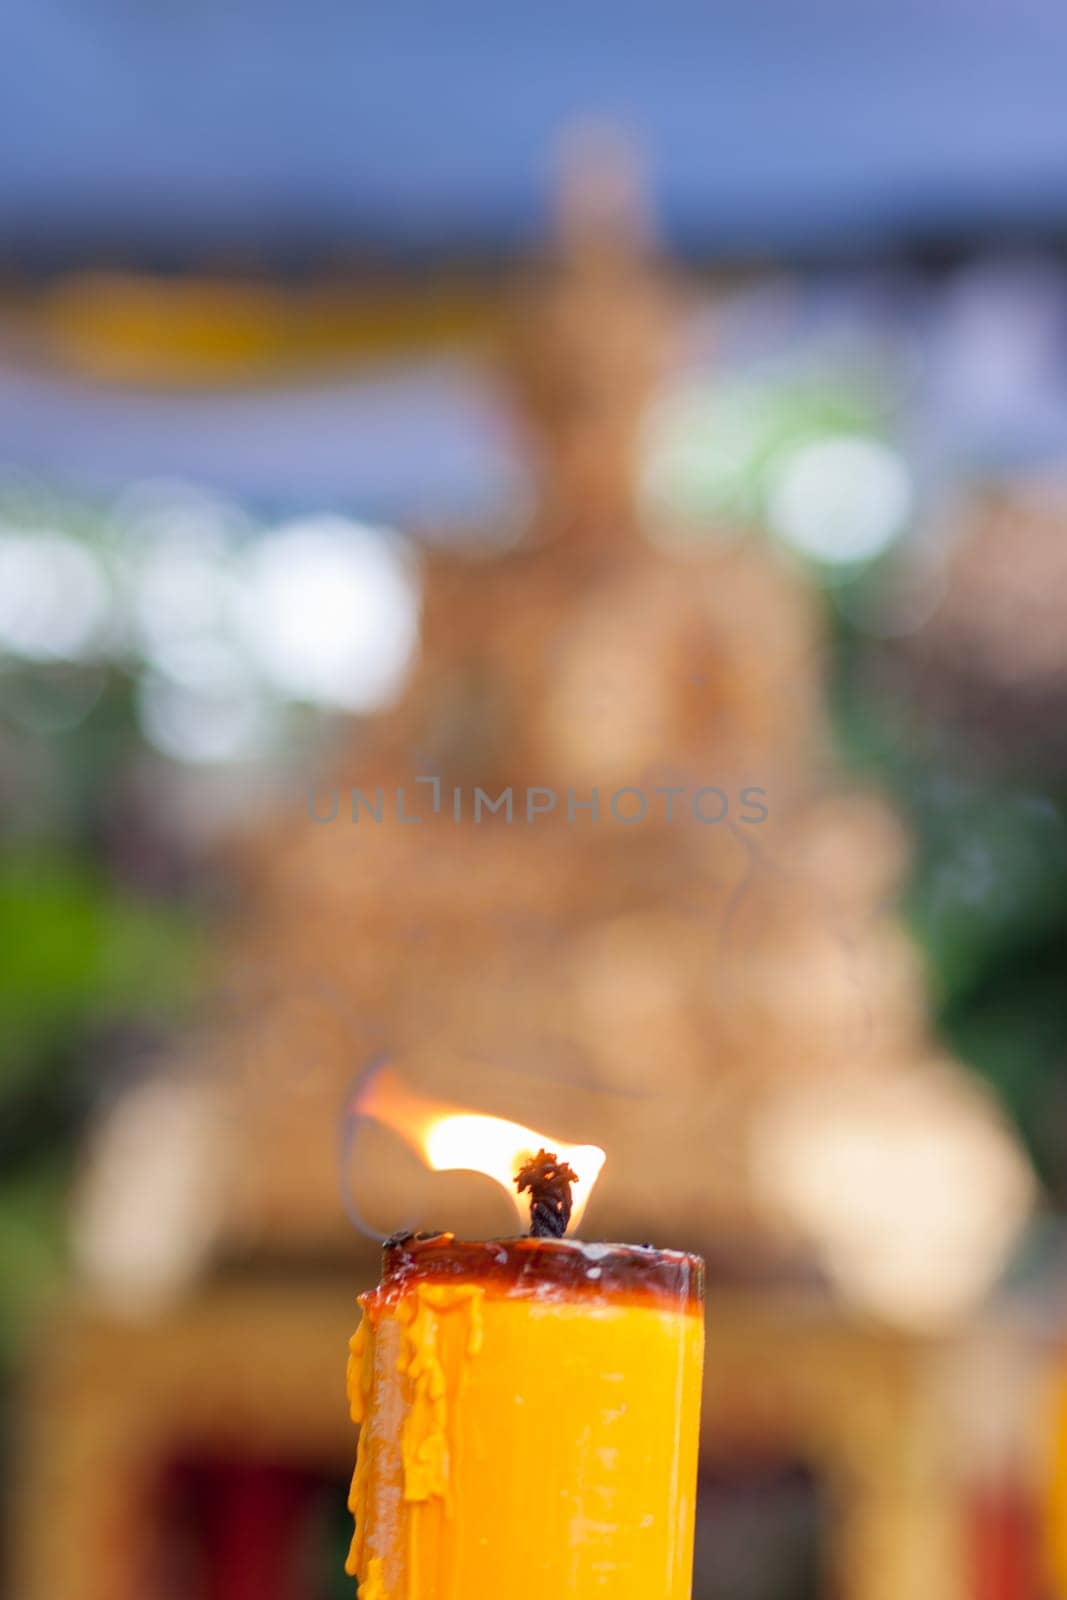 Candlelight burning in front of Buddha statue. Focus on candle frame, buddha blured in background